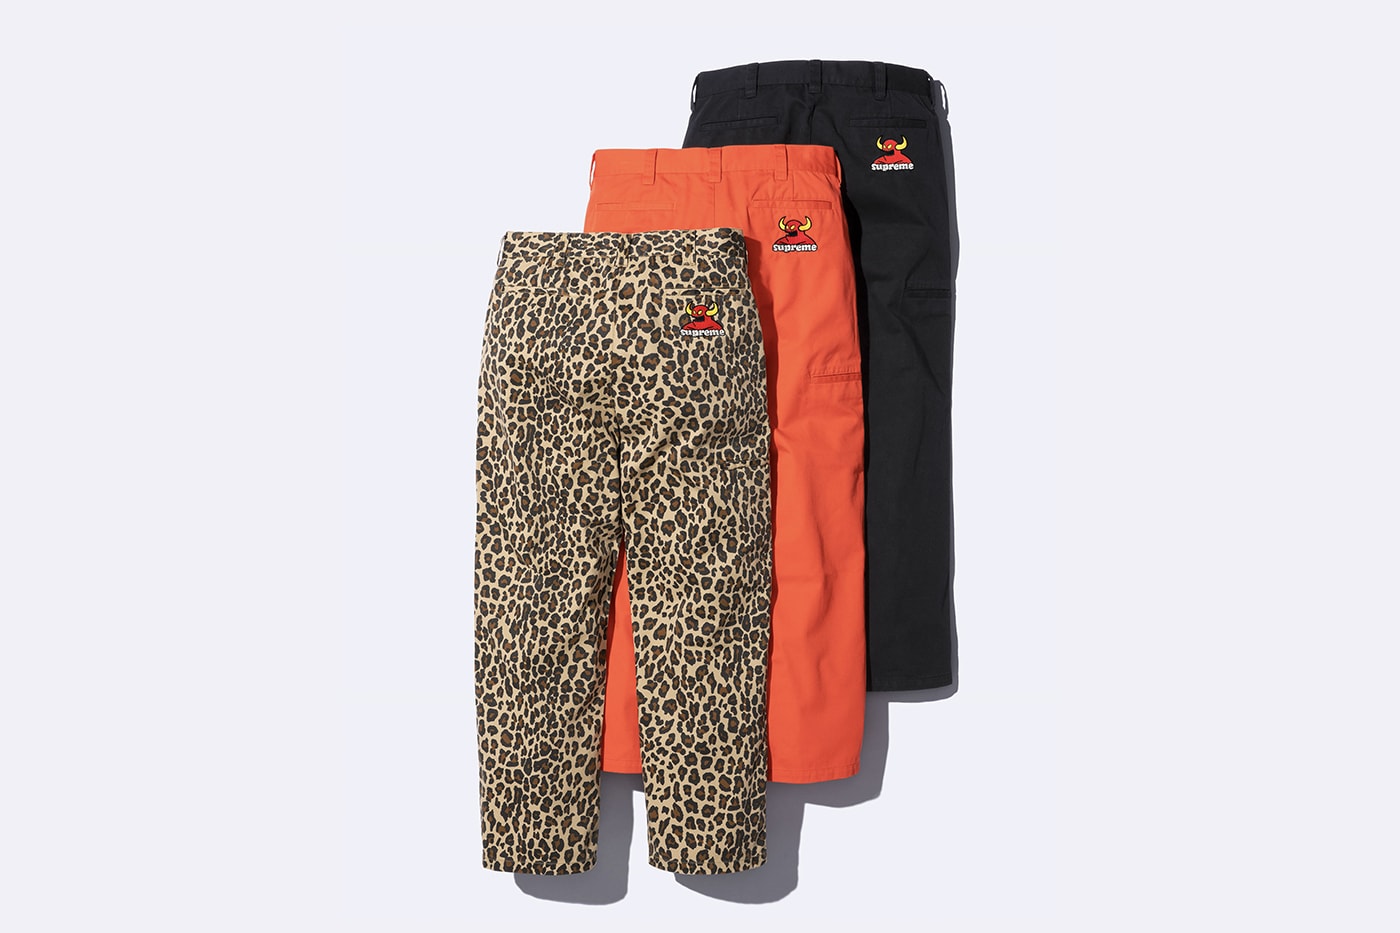 Supreme x Toy Machine Spring 2024 Collaboration t-shirts hoodies Mike Vallely skateboarder Huntington Beach, California Ed Templeton welcome to hell Thomas, Brian Anderson, Elissa Steamer, Donny Barley, Mike Maldonado and Chad Musk sweater work pants